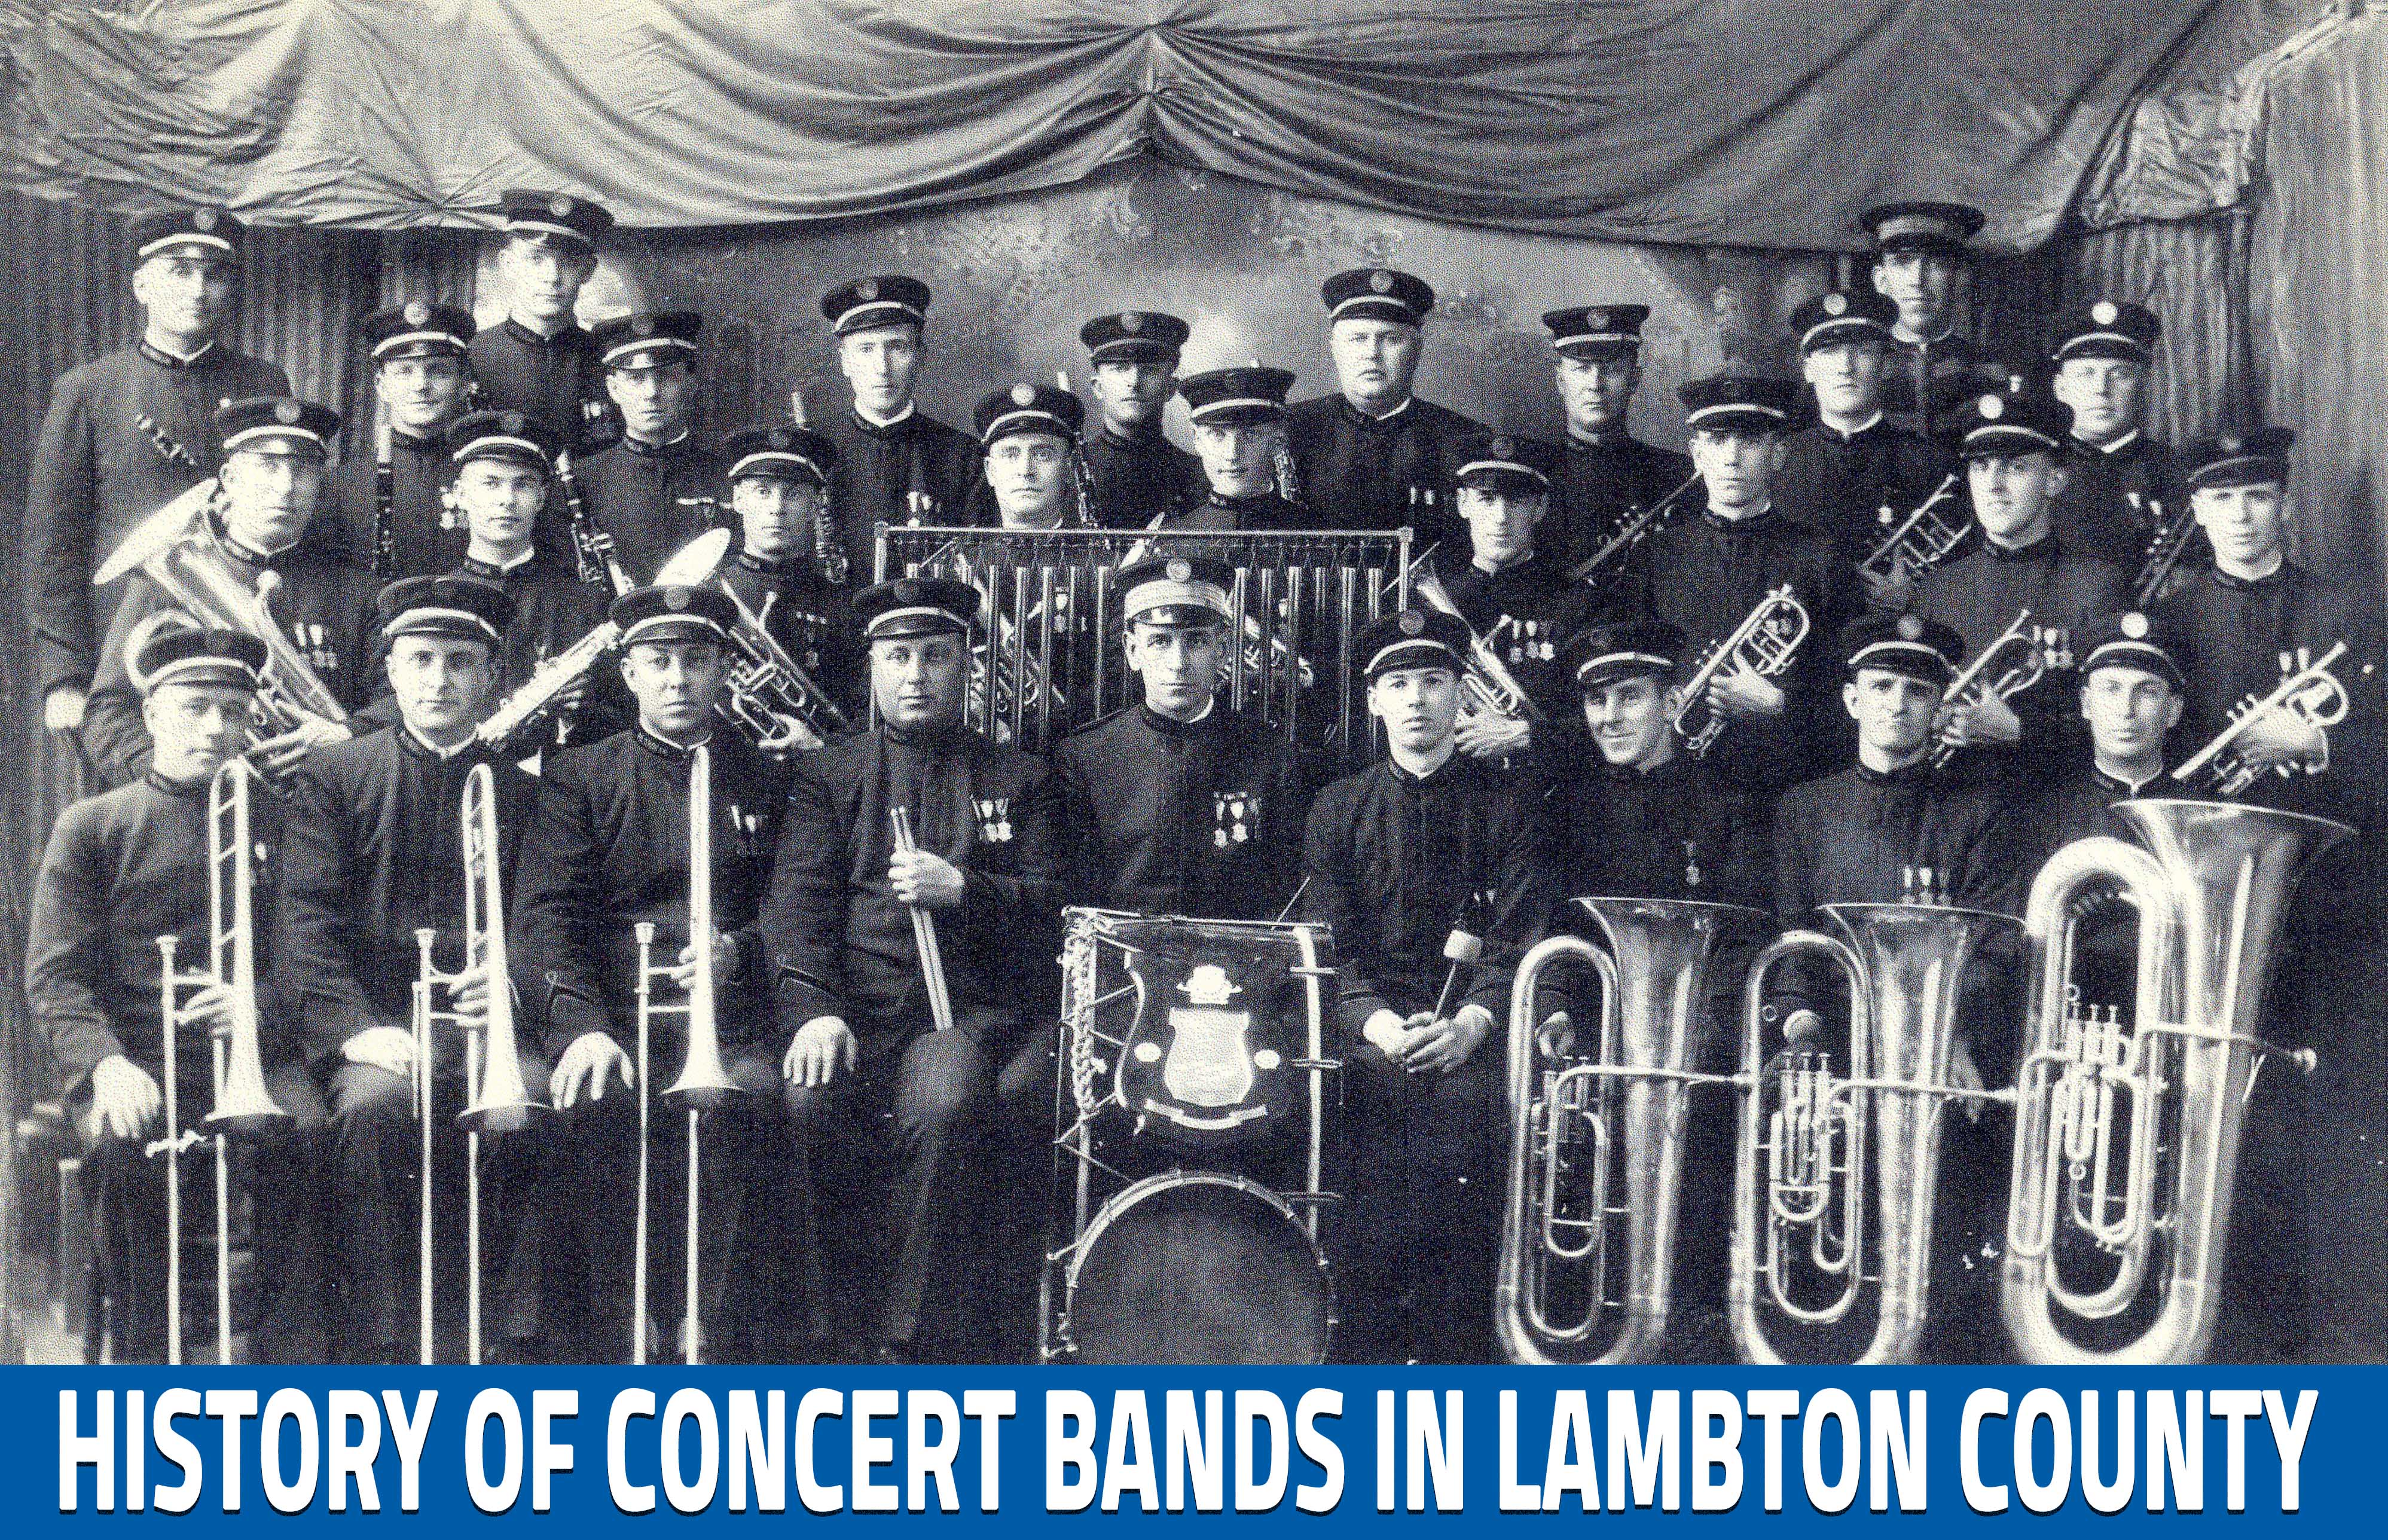 Band standing together with text banner at bottom, "History of Concert Bands in Lambton County".